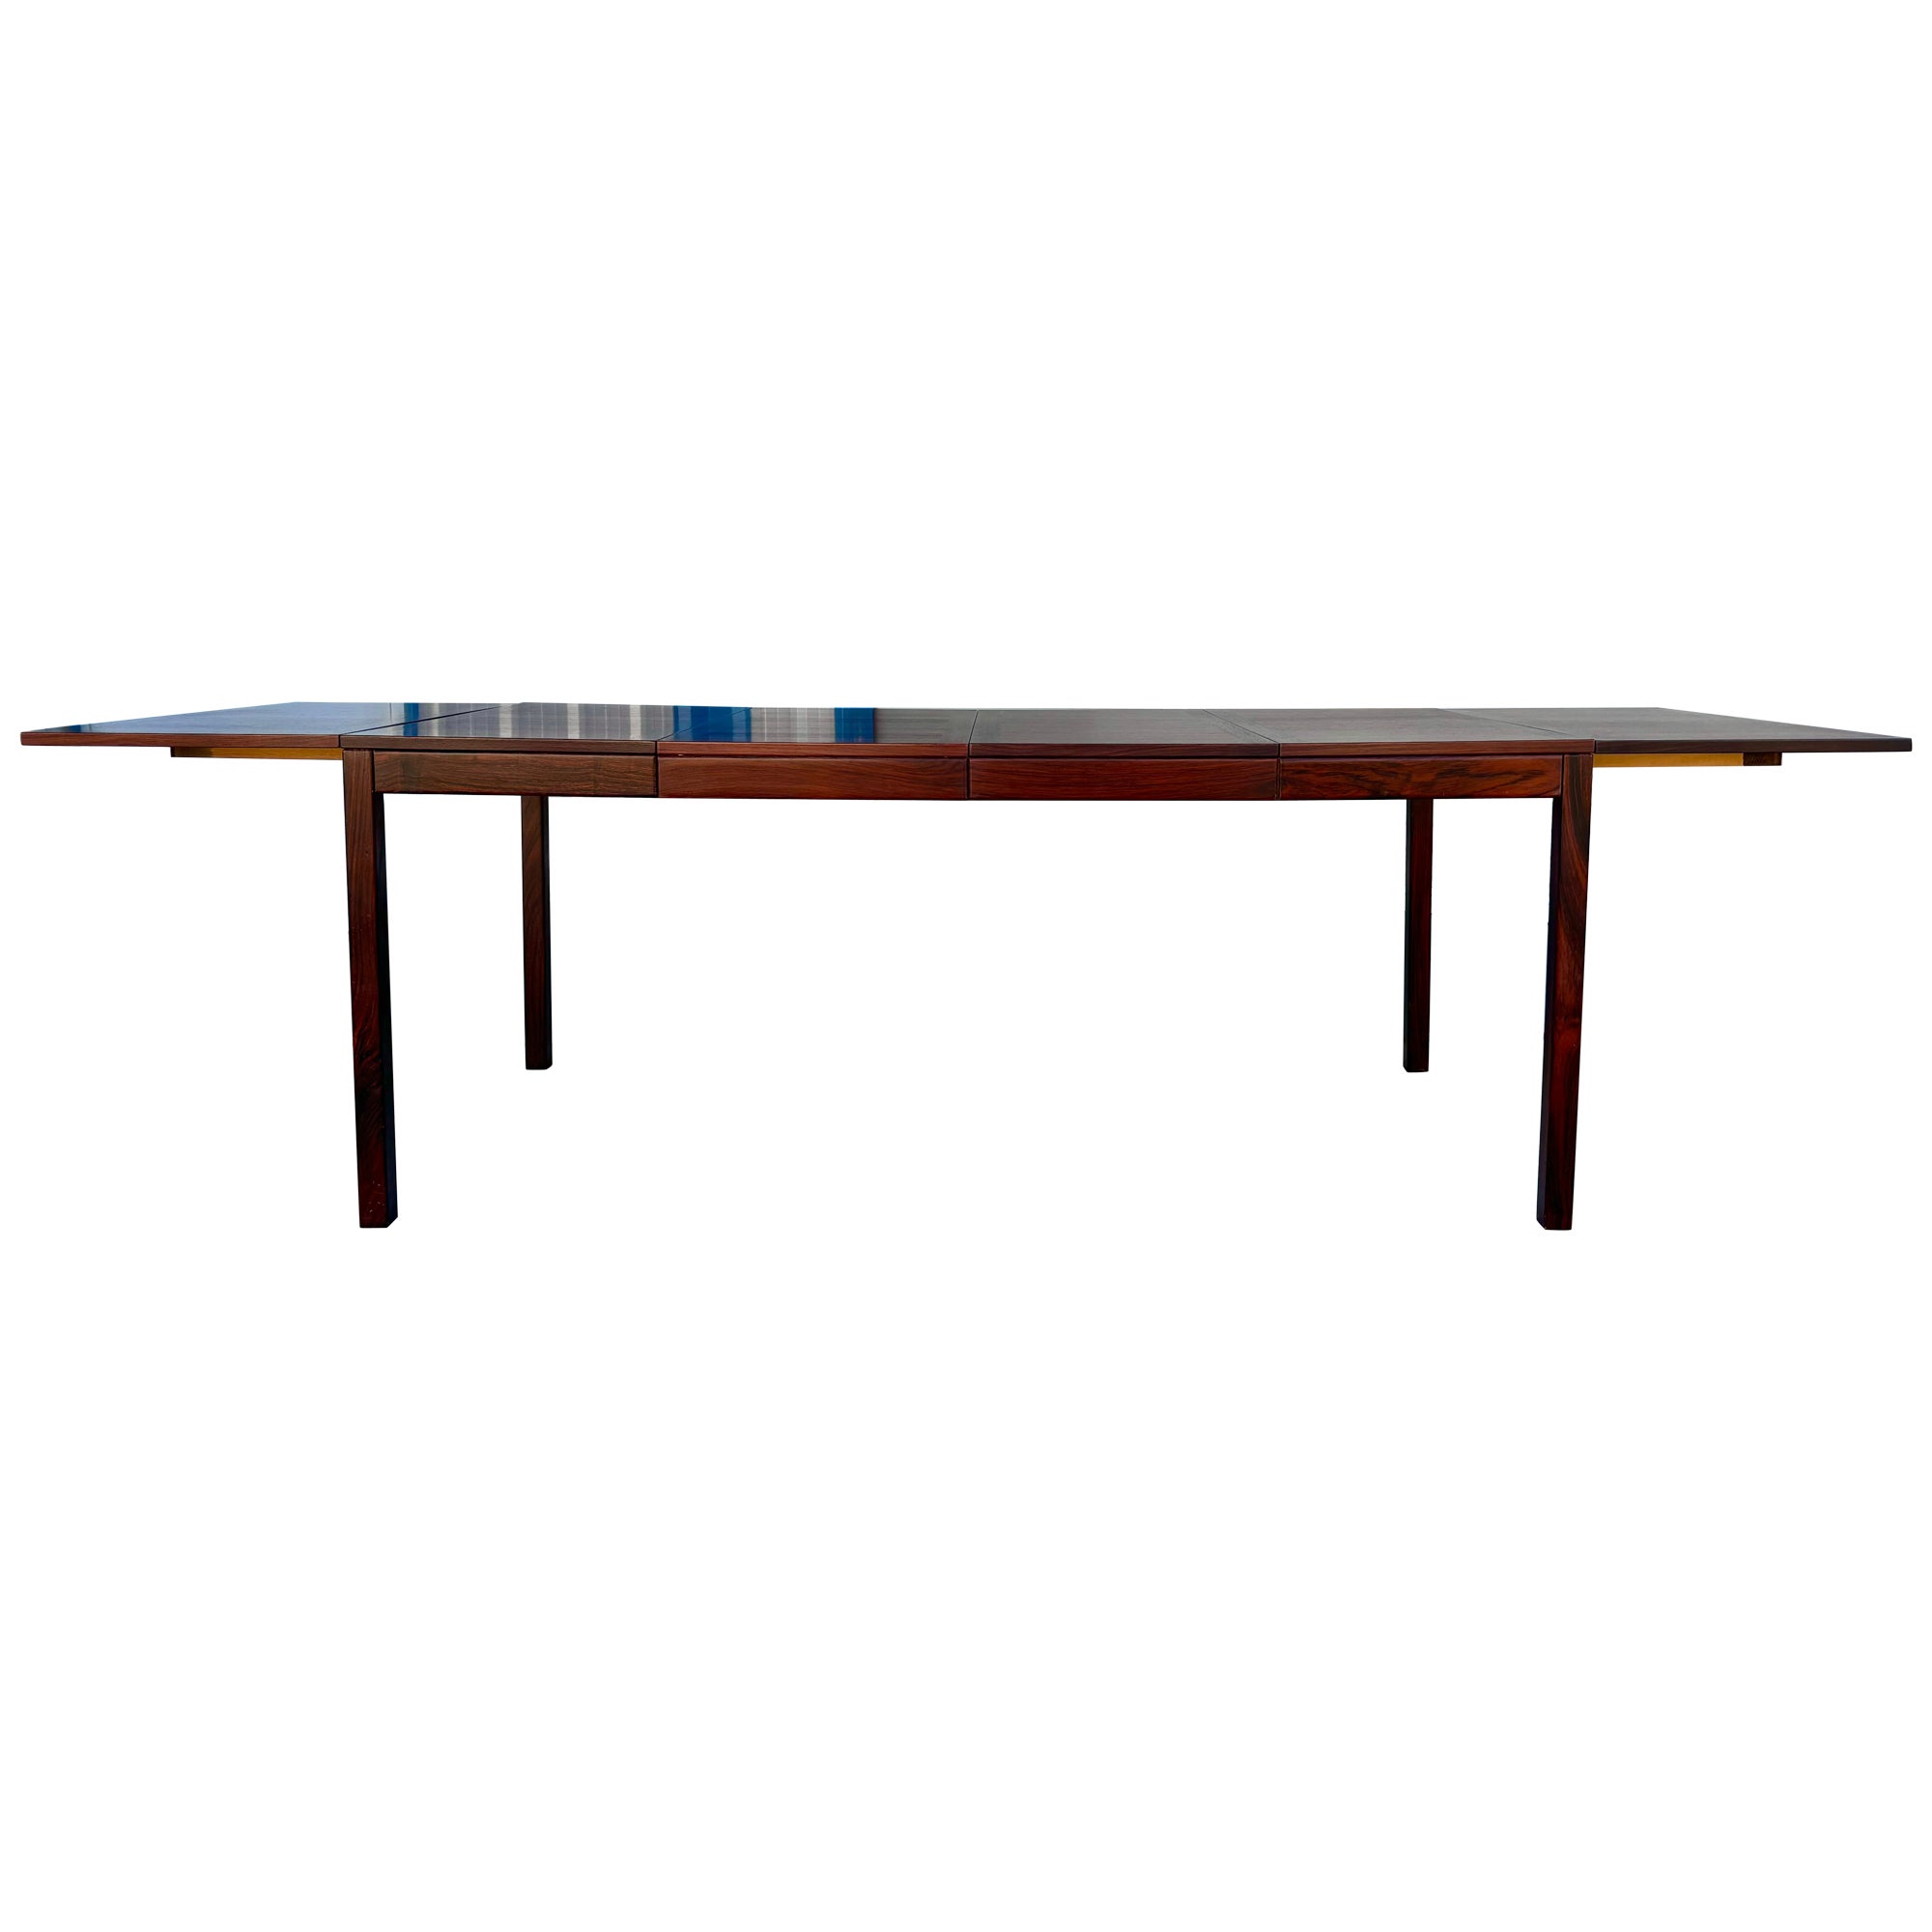 1970s Danish Modern Rosewood Extending Dining Table by Vejle Stole & Møbelfabrik For Sale